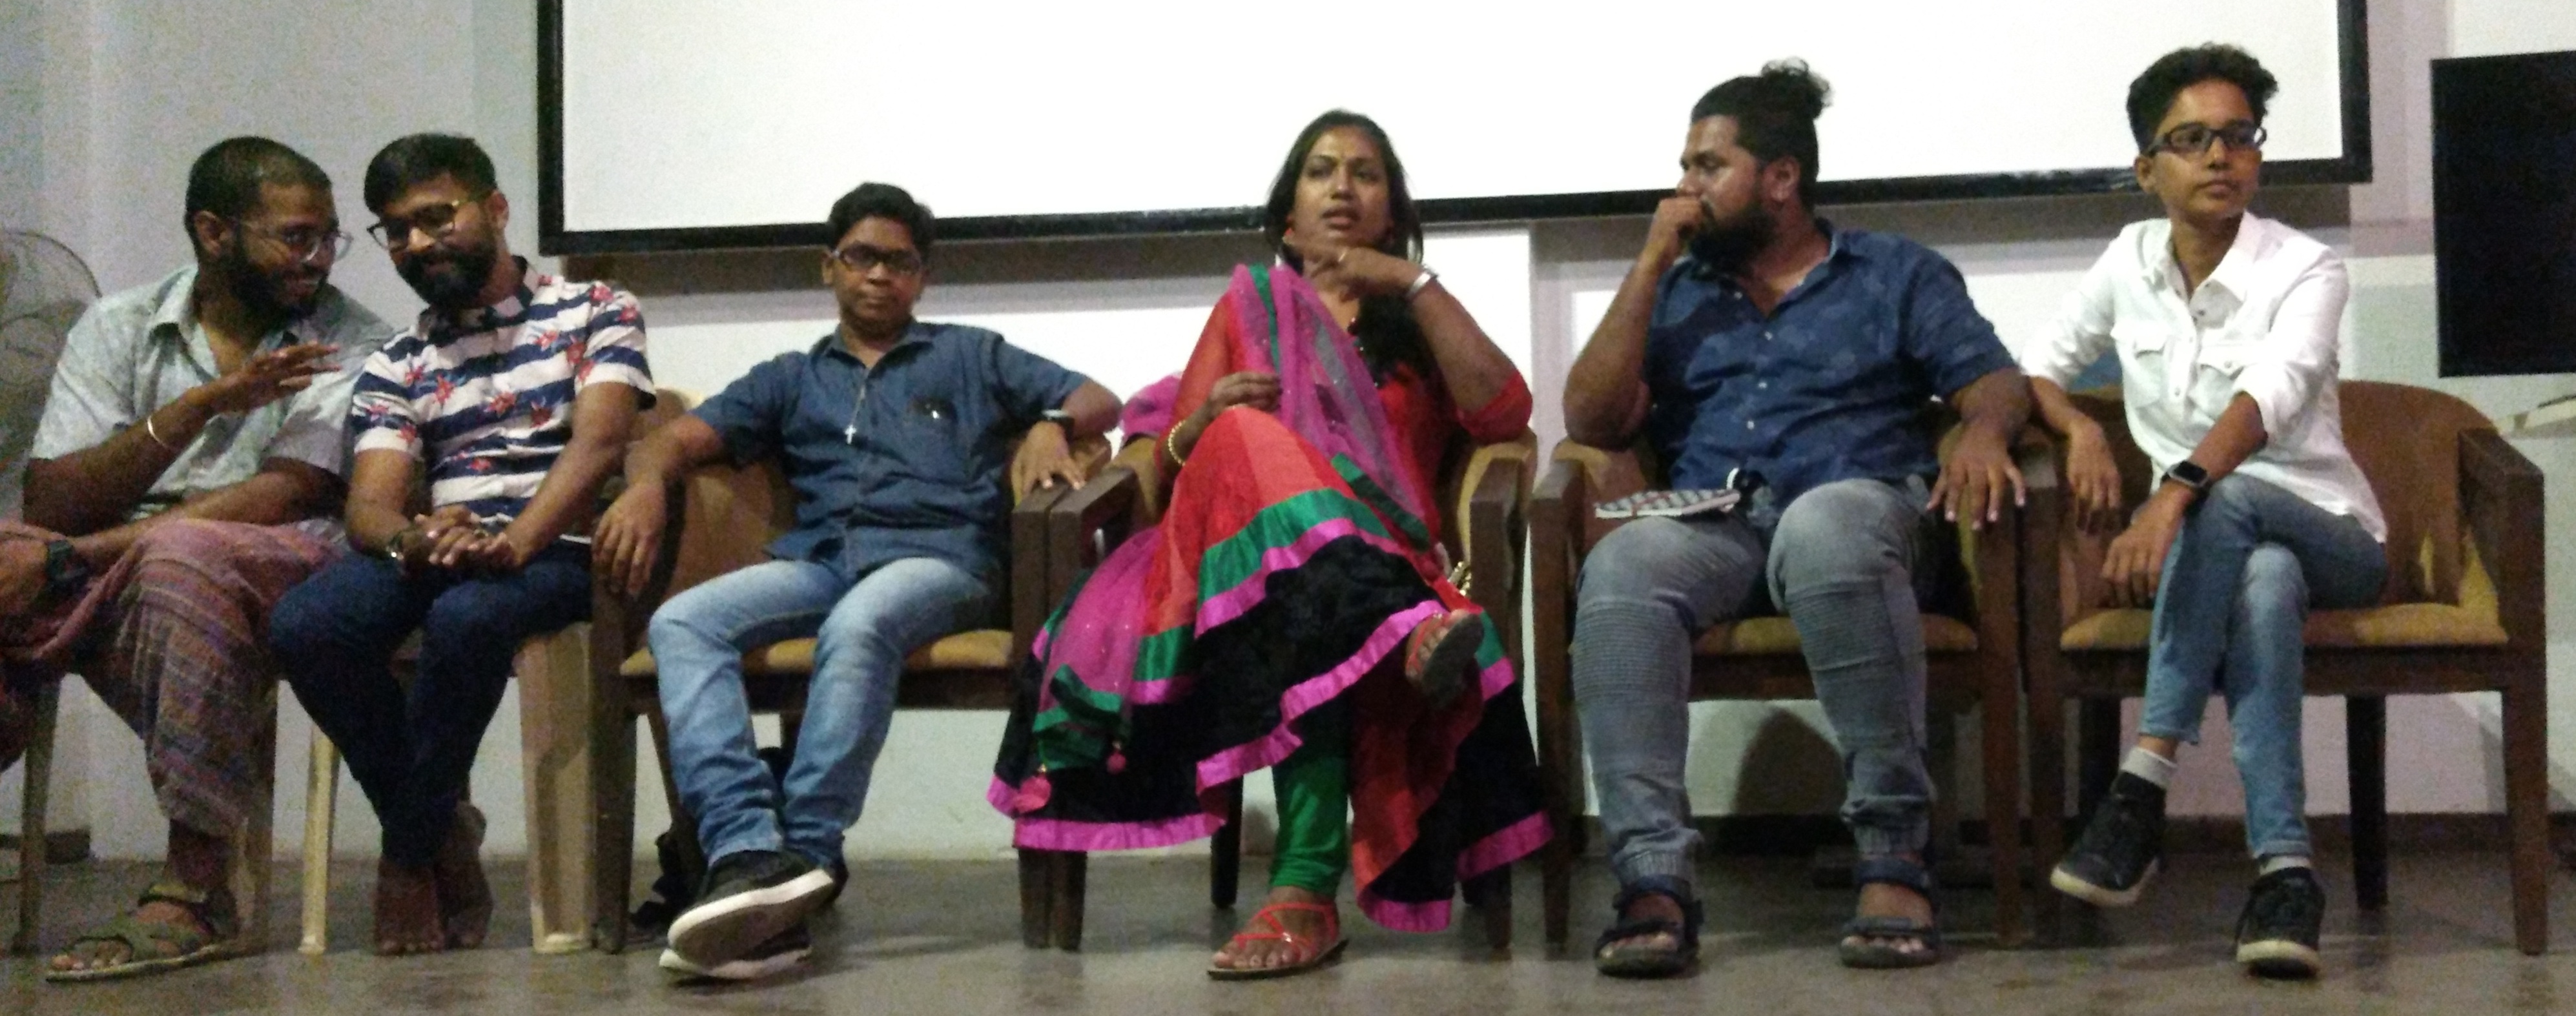 Queer Coimbatore: visible, unabashed, unapologetic